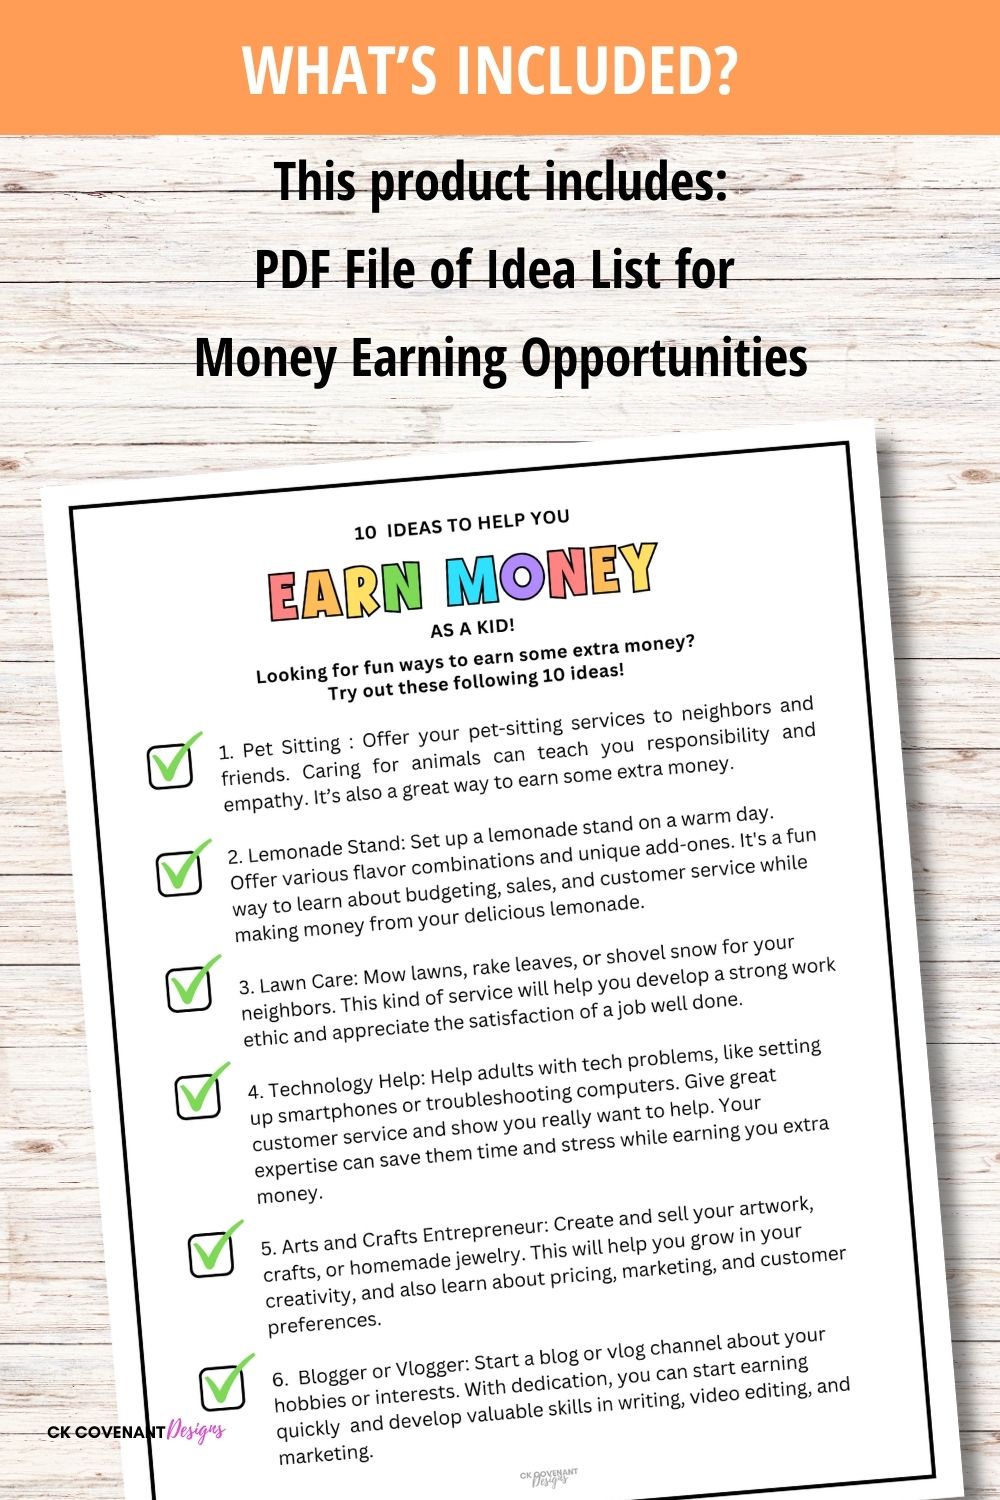 10 Ideas to Help You Earn Money as a Kid